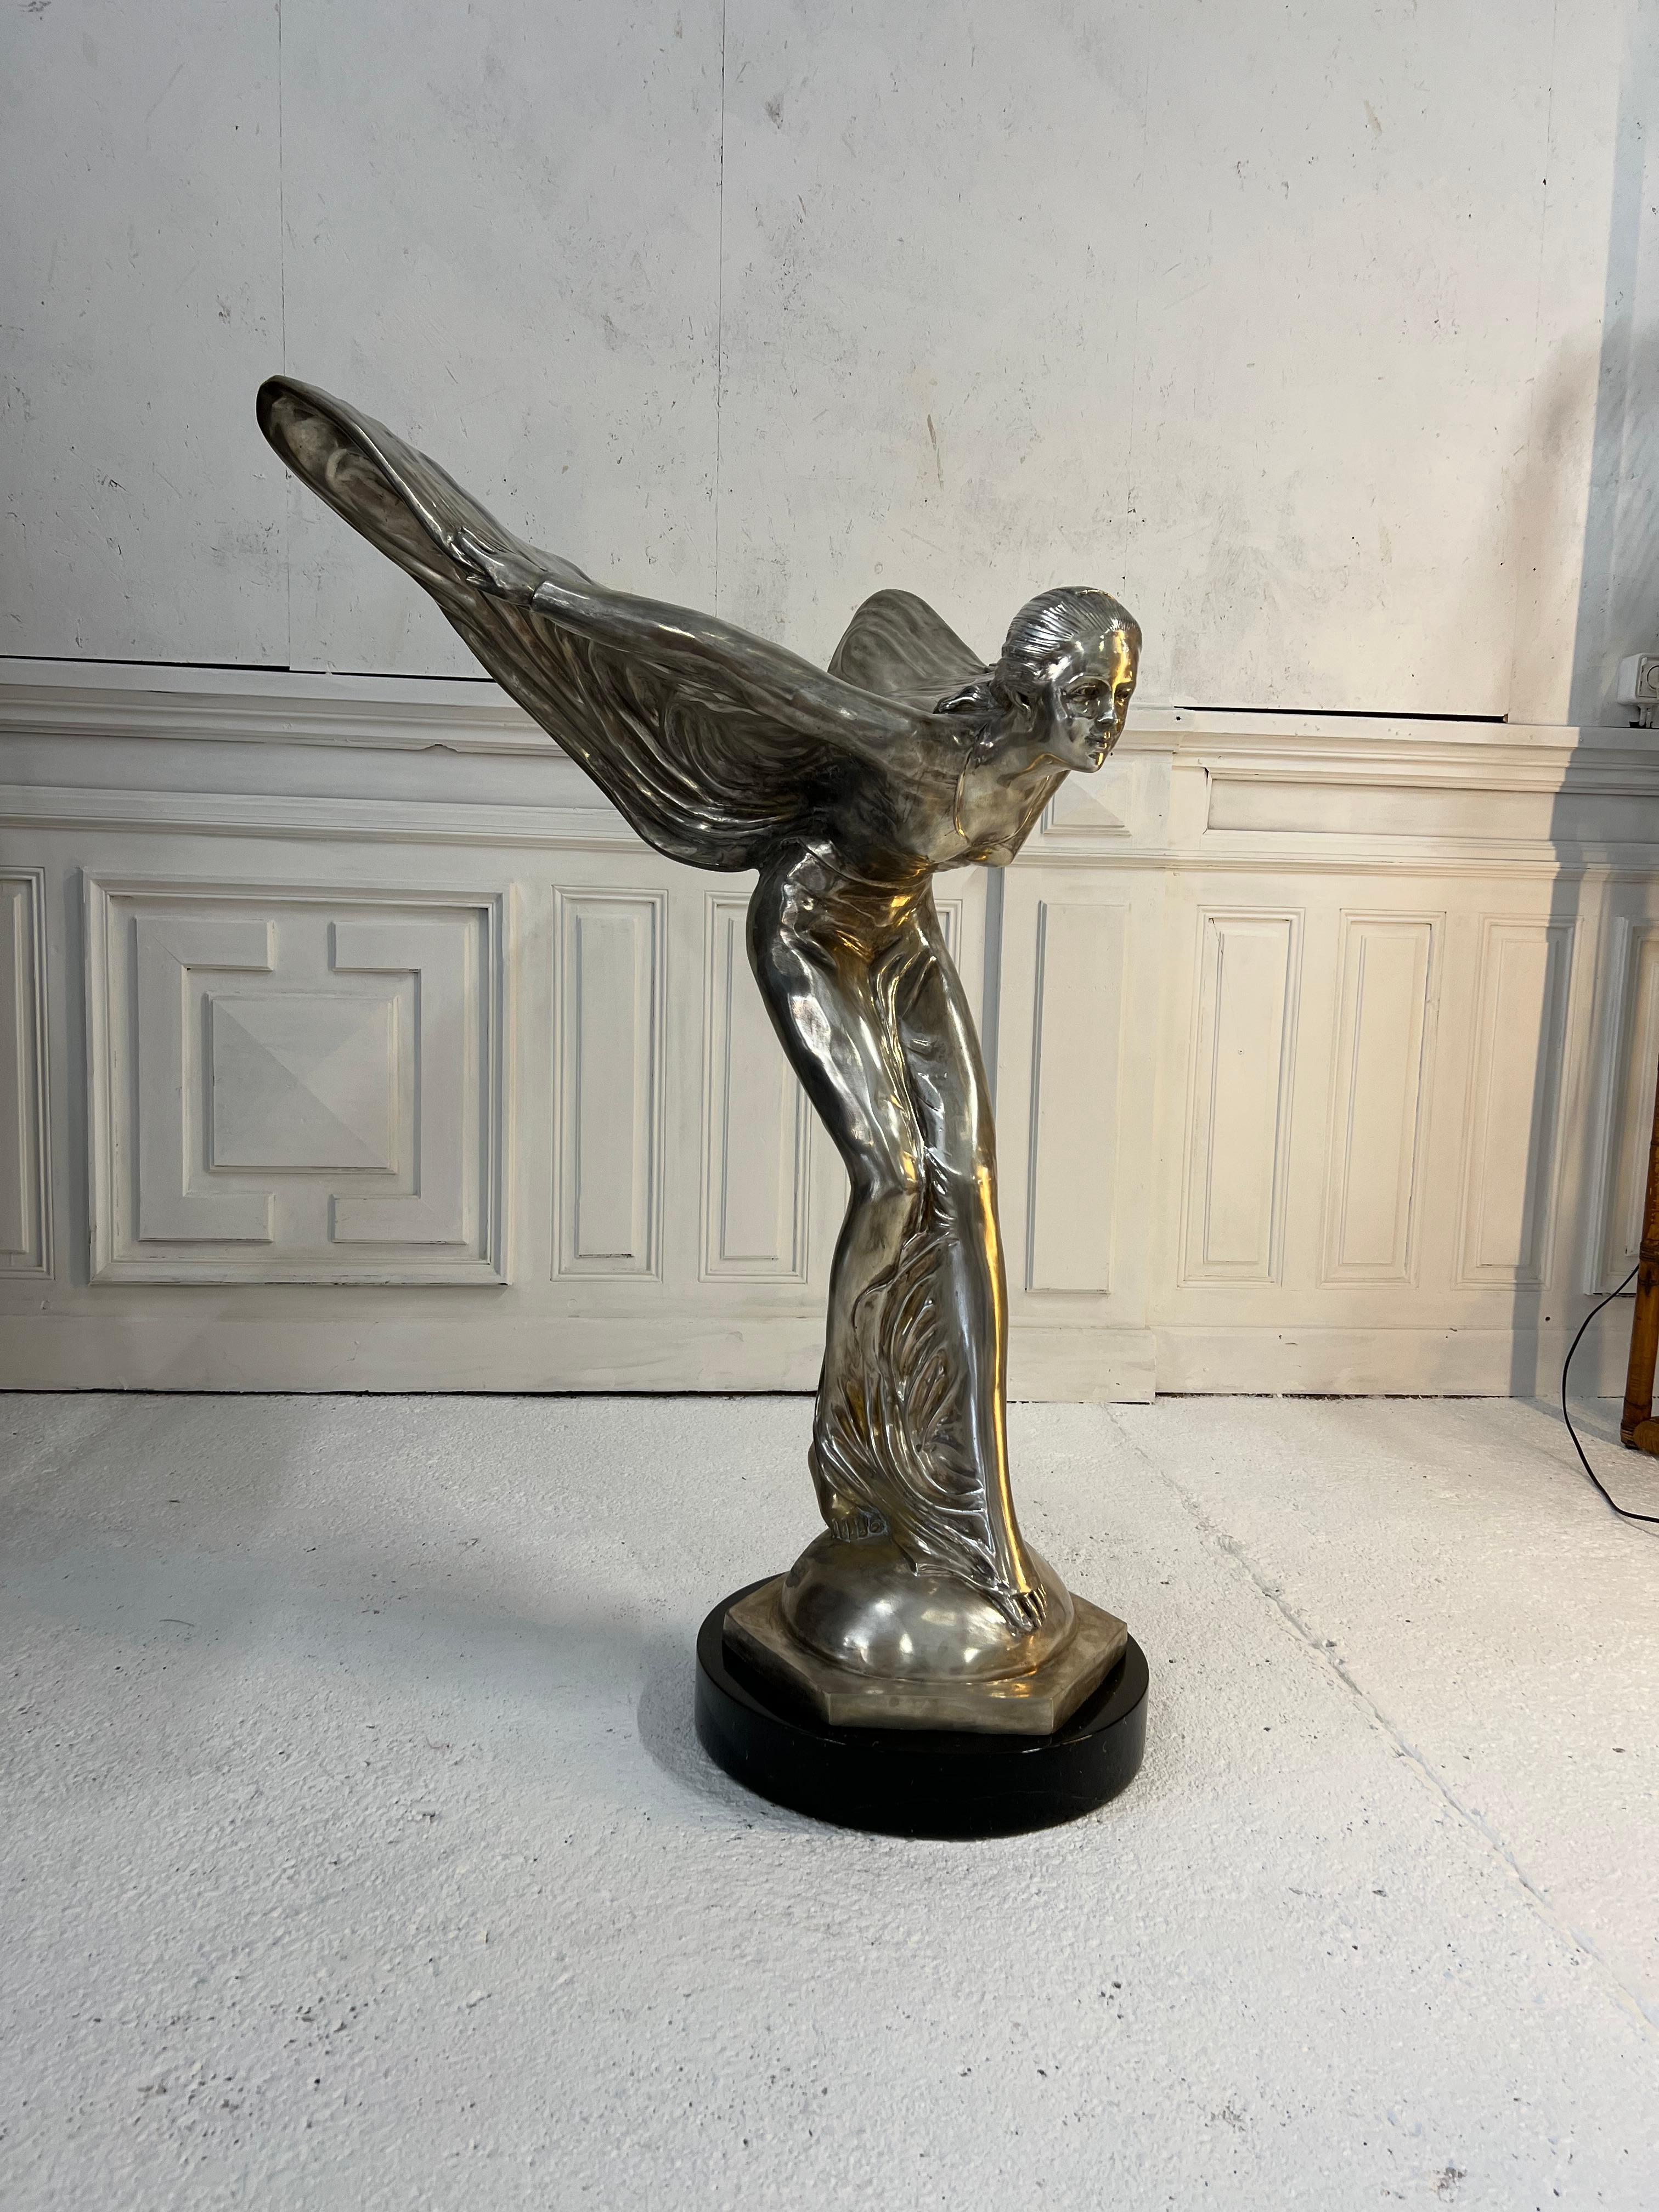 large silver bronze sculpture Rolls Royce, Spirit of extasy
we have a pair that was purchased from a car collector
Spirit of Ecstasy (